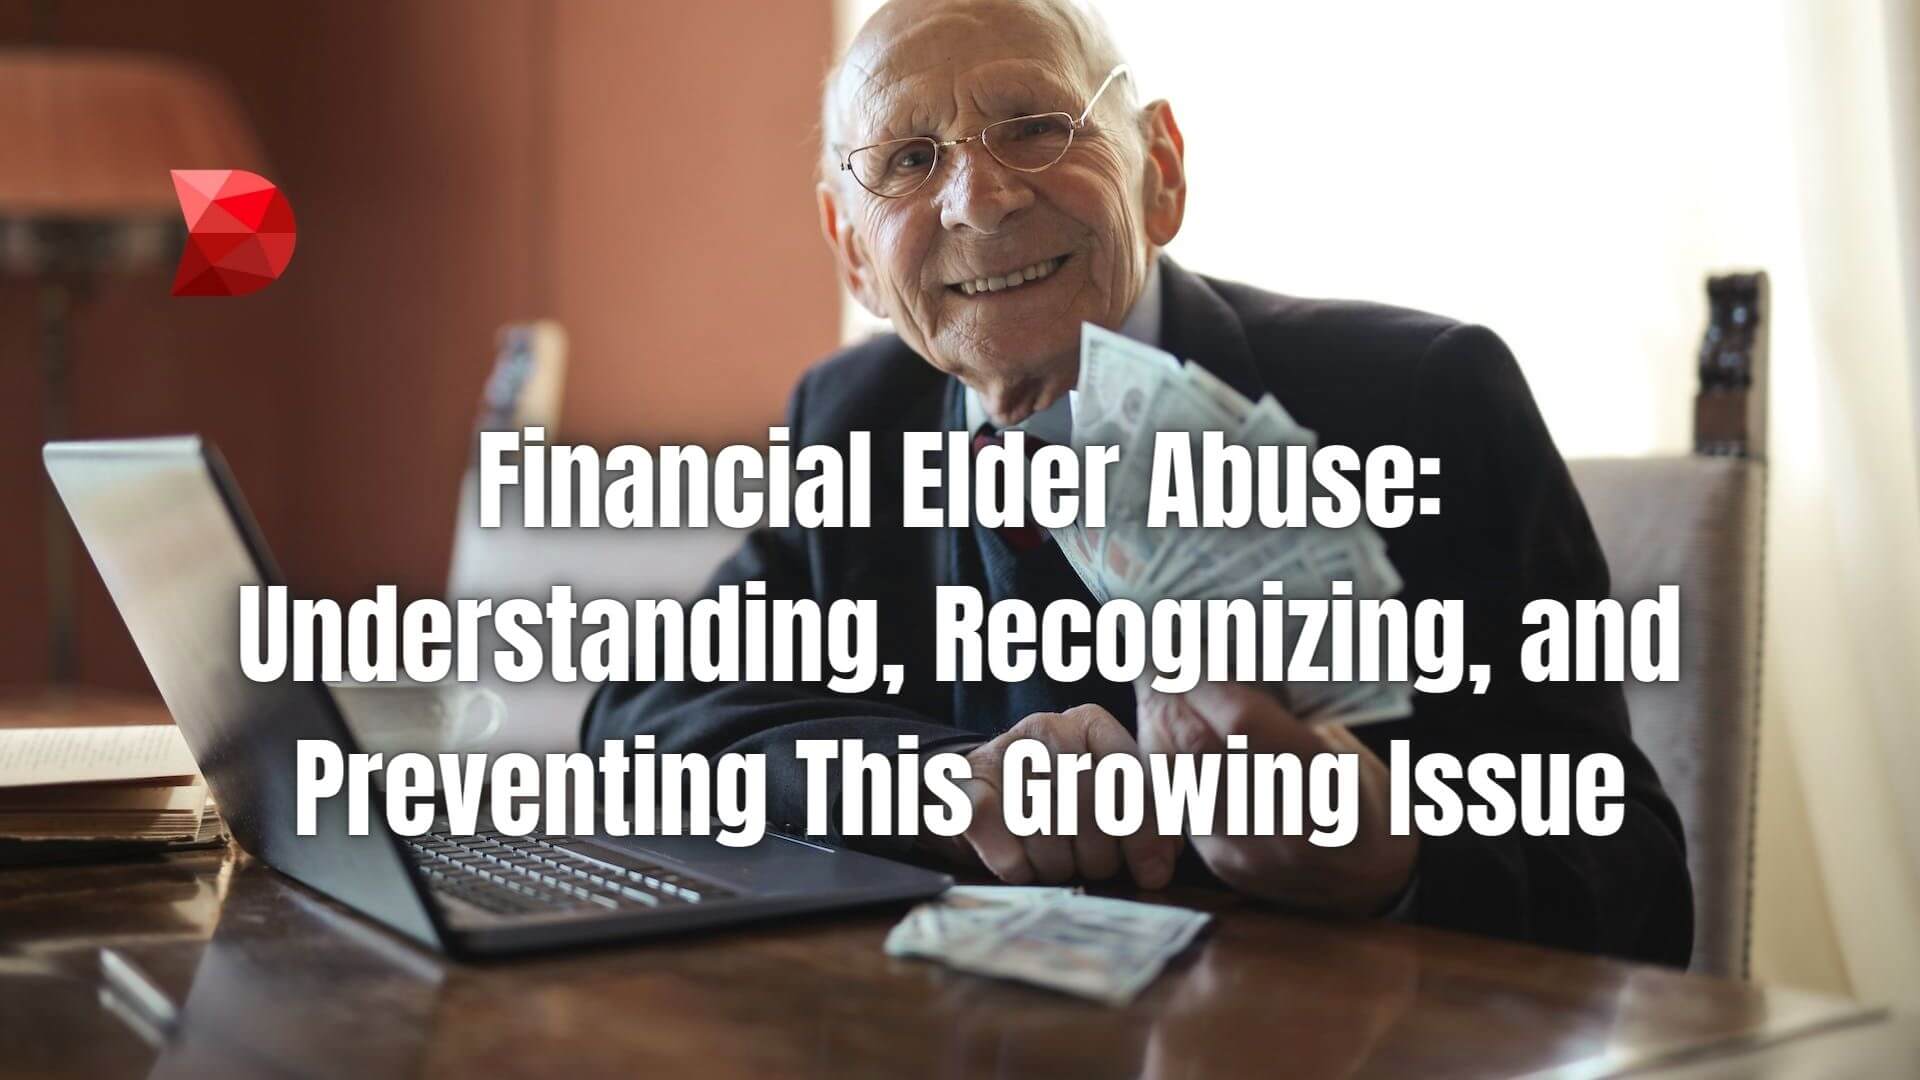 Empower yourself with knowledge on Financial Elder Abuse. Click here to learn how to recognize, prevent, and act against exploitation.